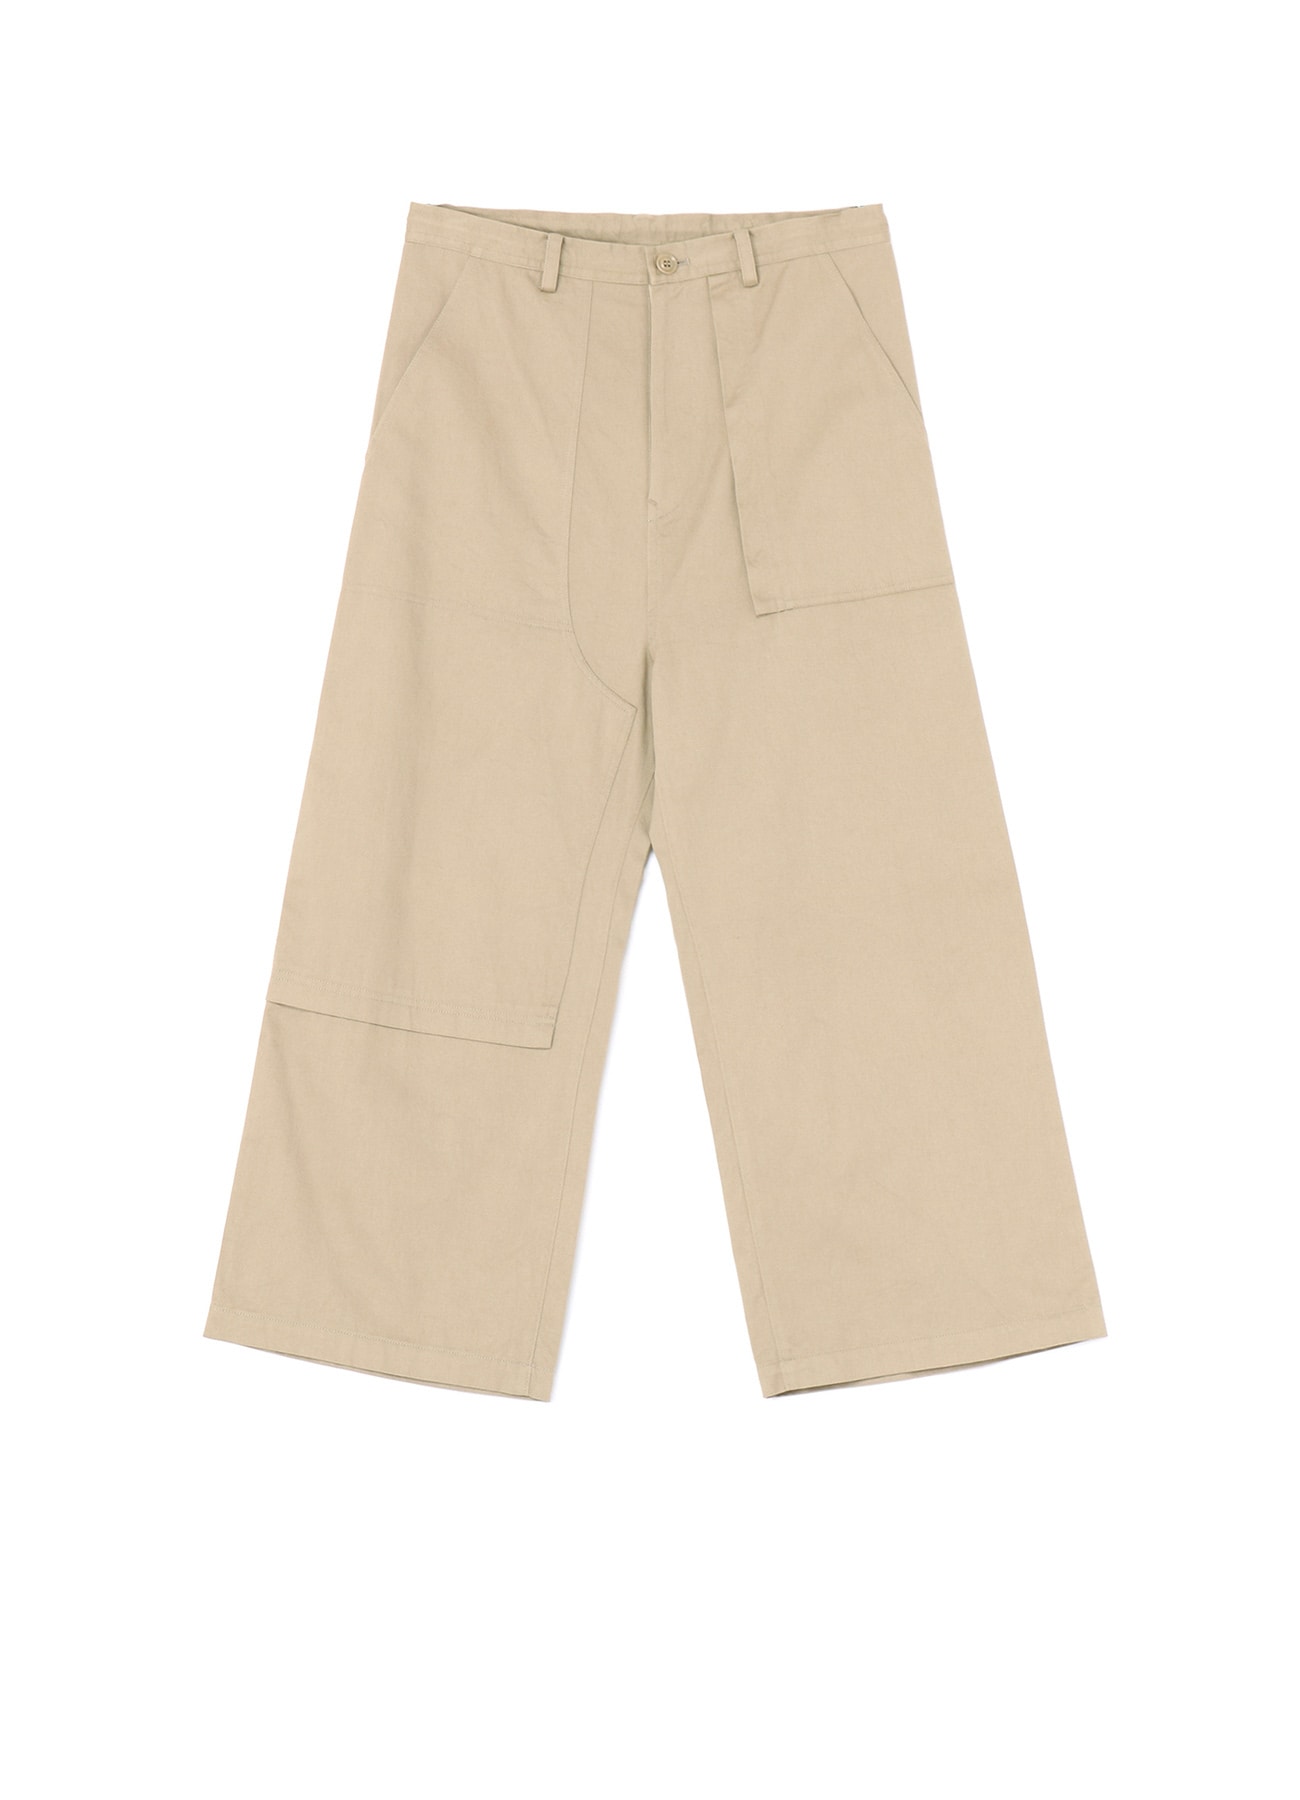 [Y's BORN PRODUCT] COTTON TWILL LONG STRAIGHT PANTS